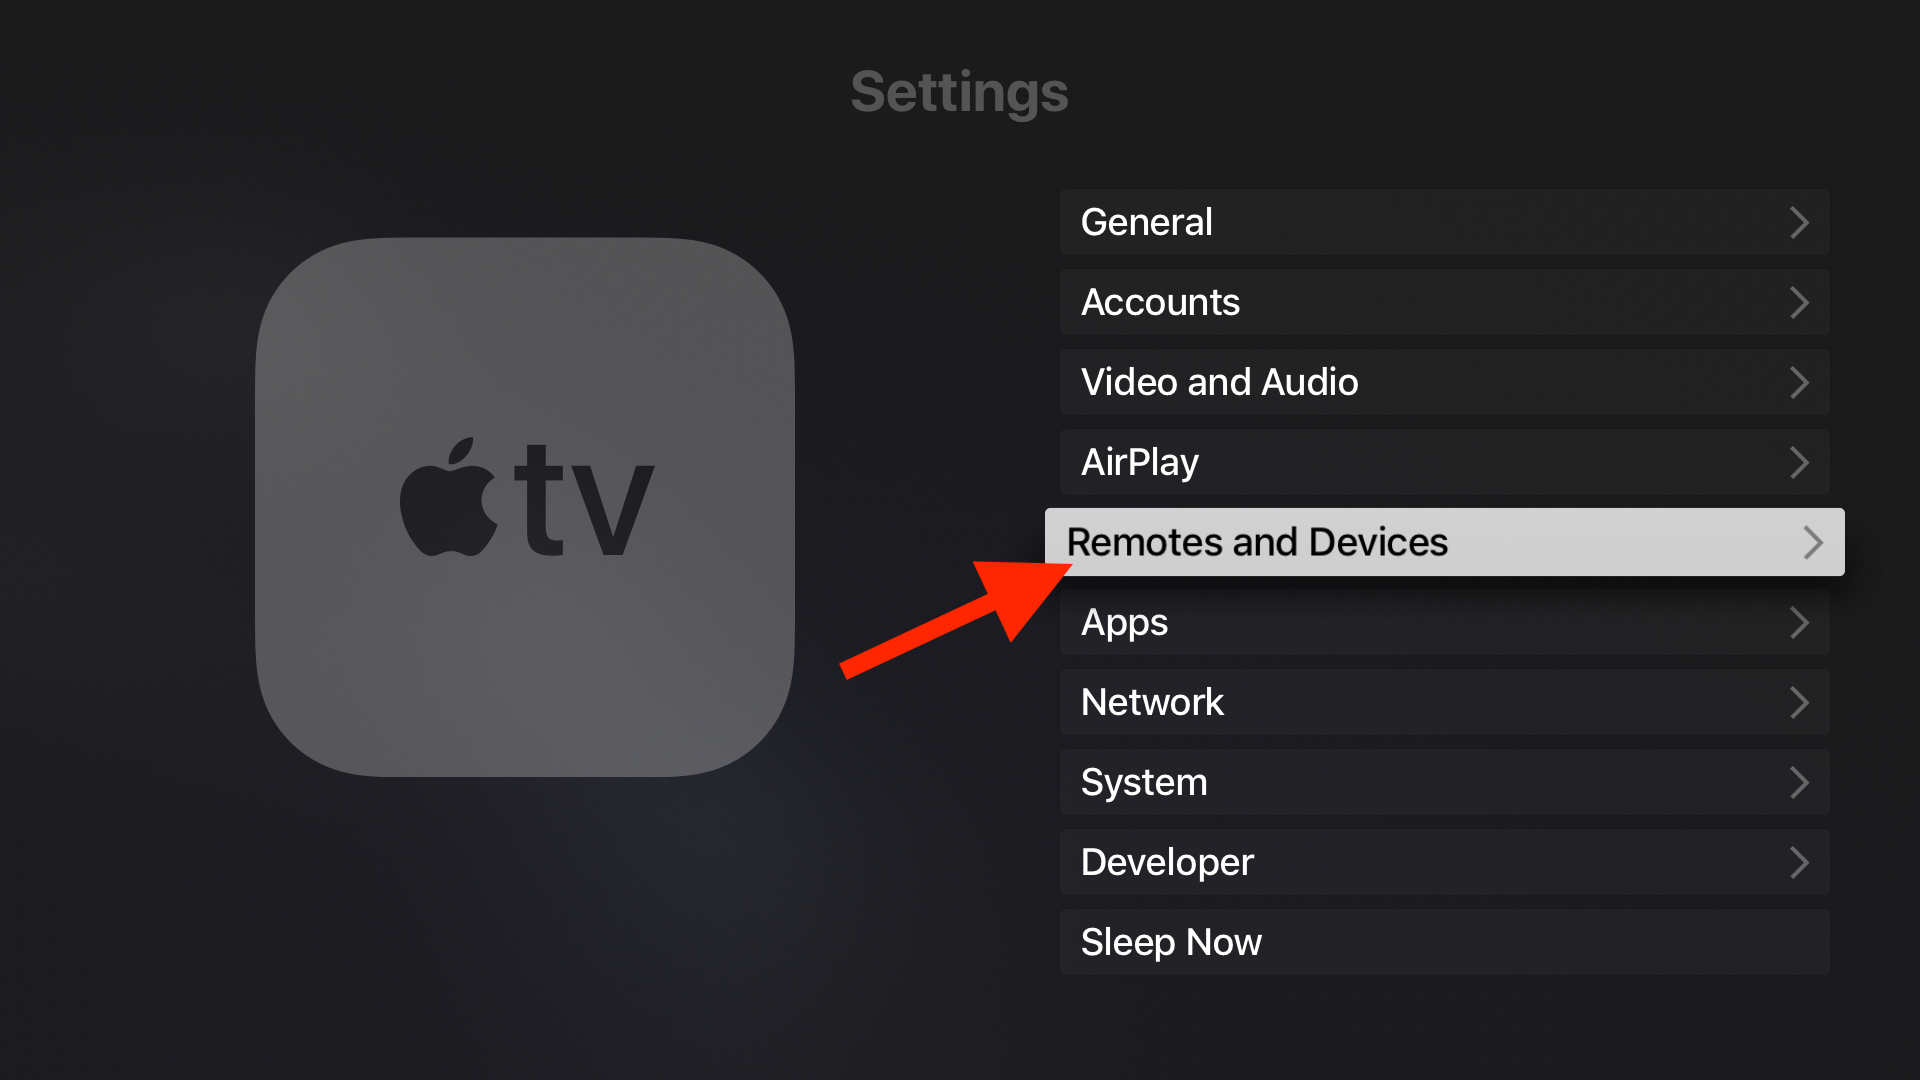 Step 2: Open "Remotes and Devices".